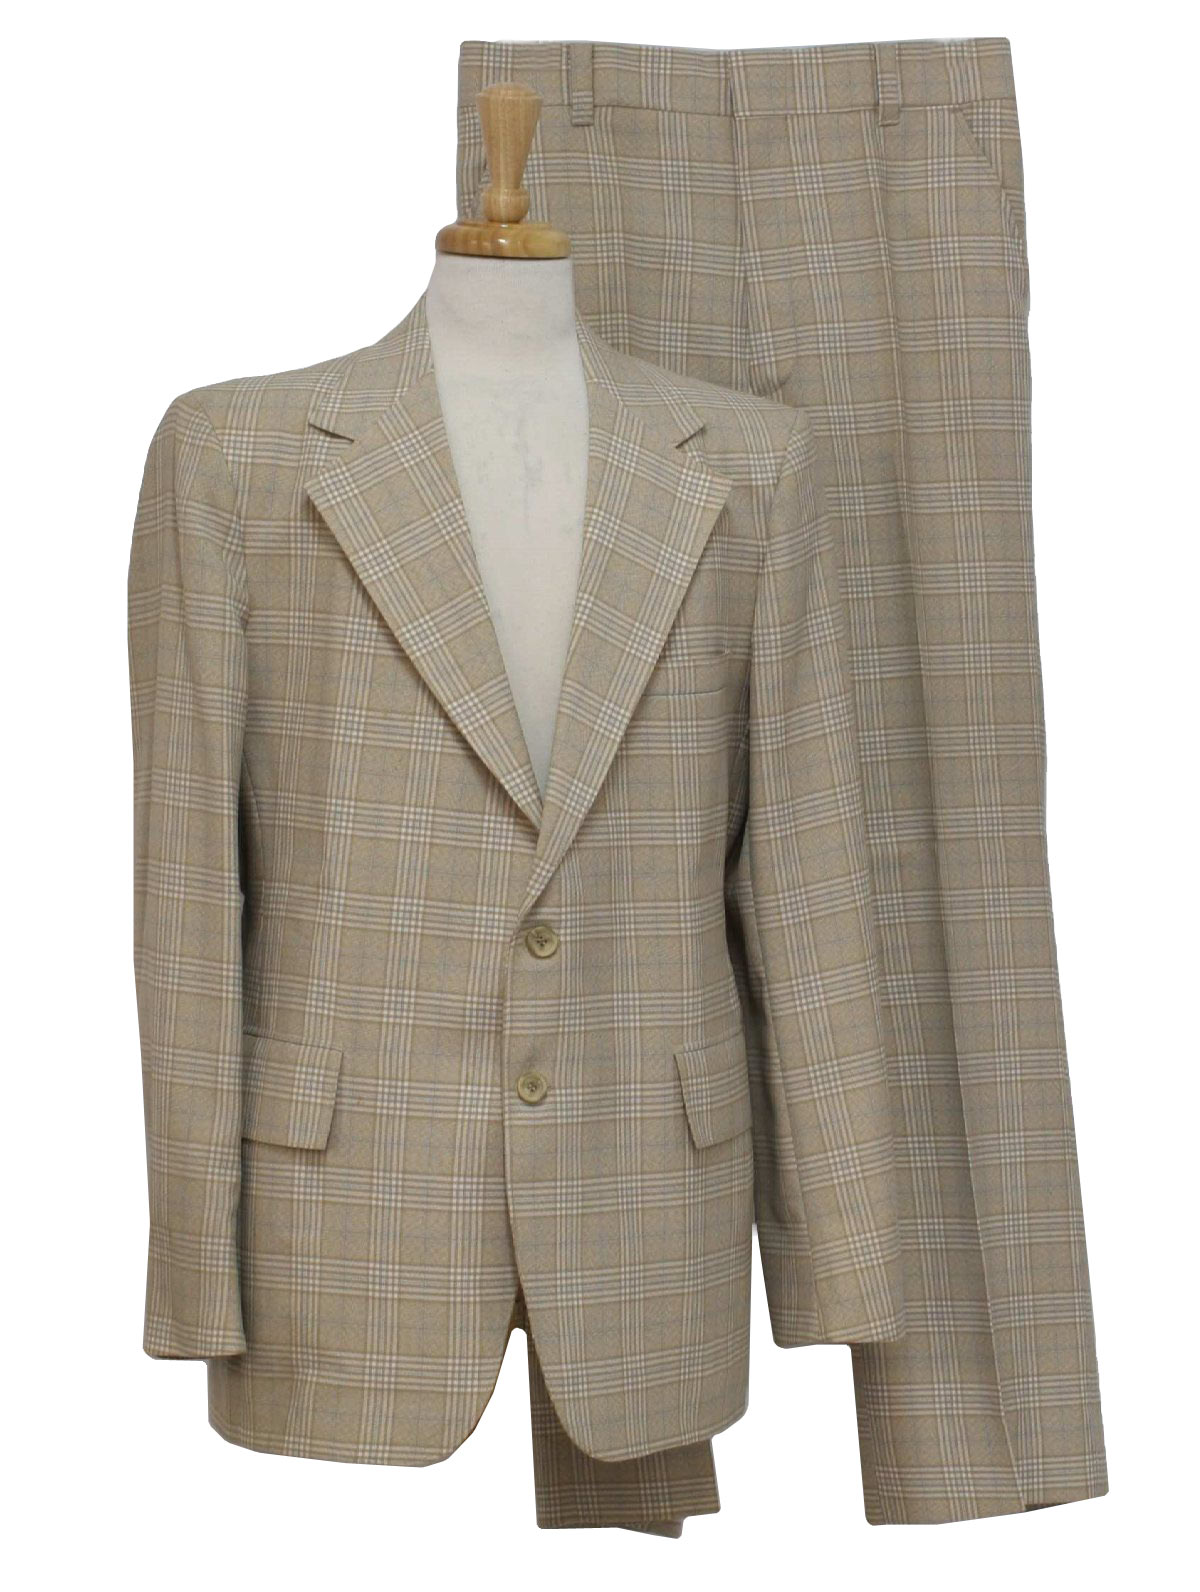 1970's Retro Disco Suit: 70s -JCPenney- Mens polyester windowpane plaid ...